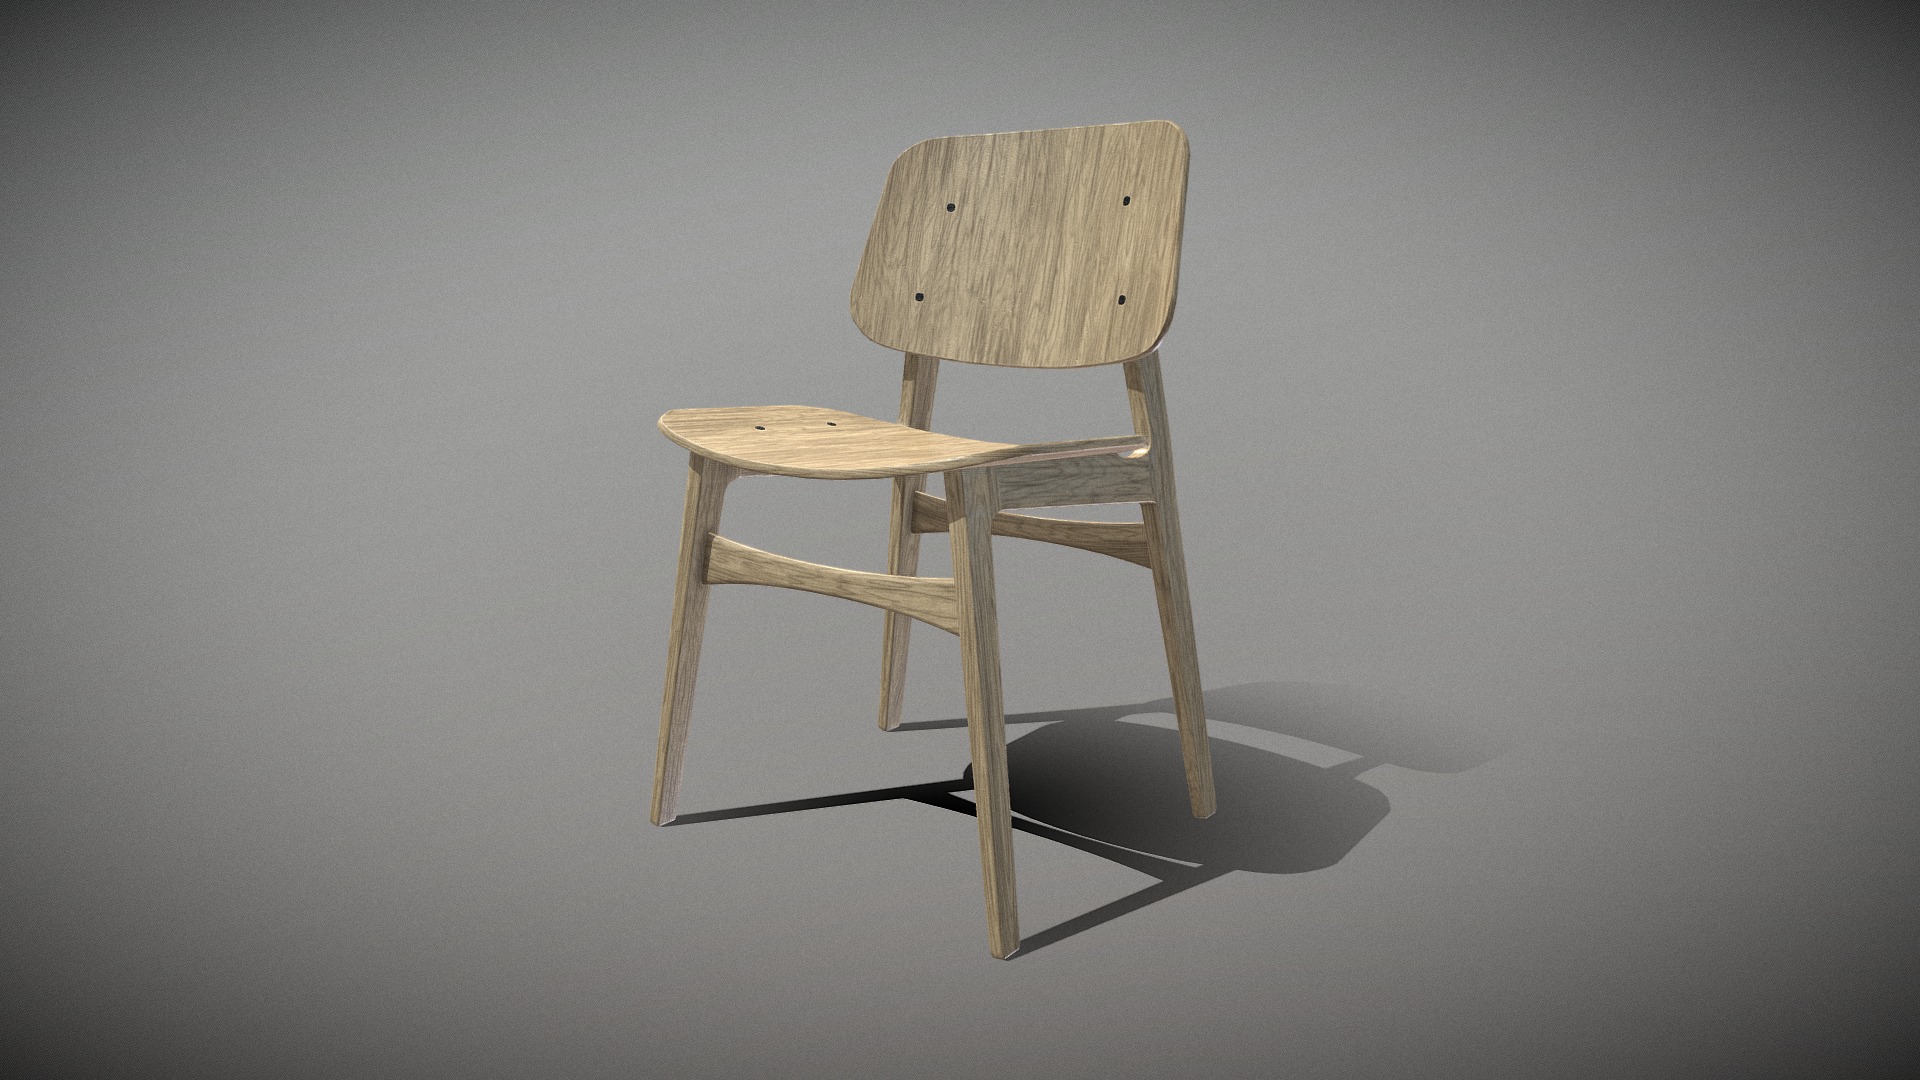 3D model Soborg Chair oak standard Lacquered wood - This is a 3D model of the Soborg Chair oak standard Lacquered wood. The 3D model is about a wooden chair on a white background.